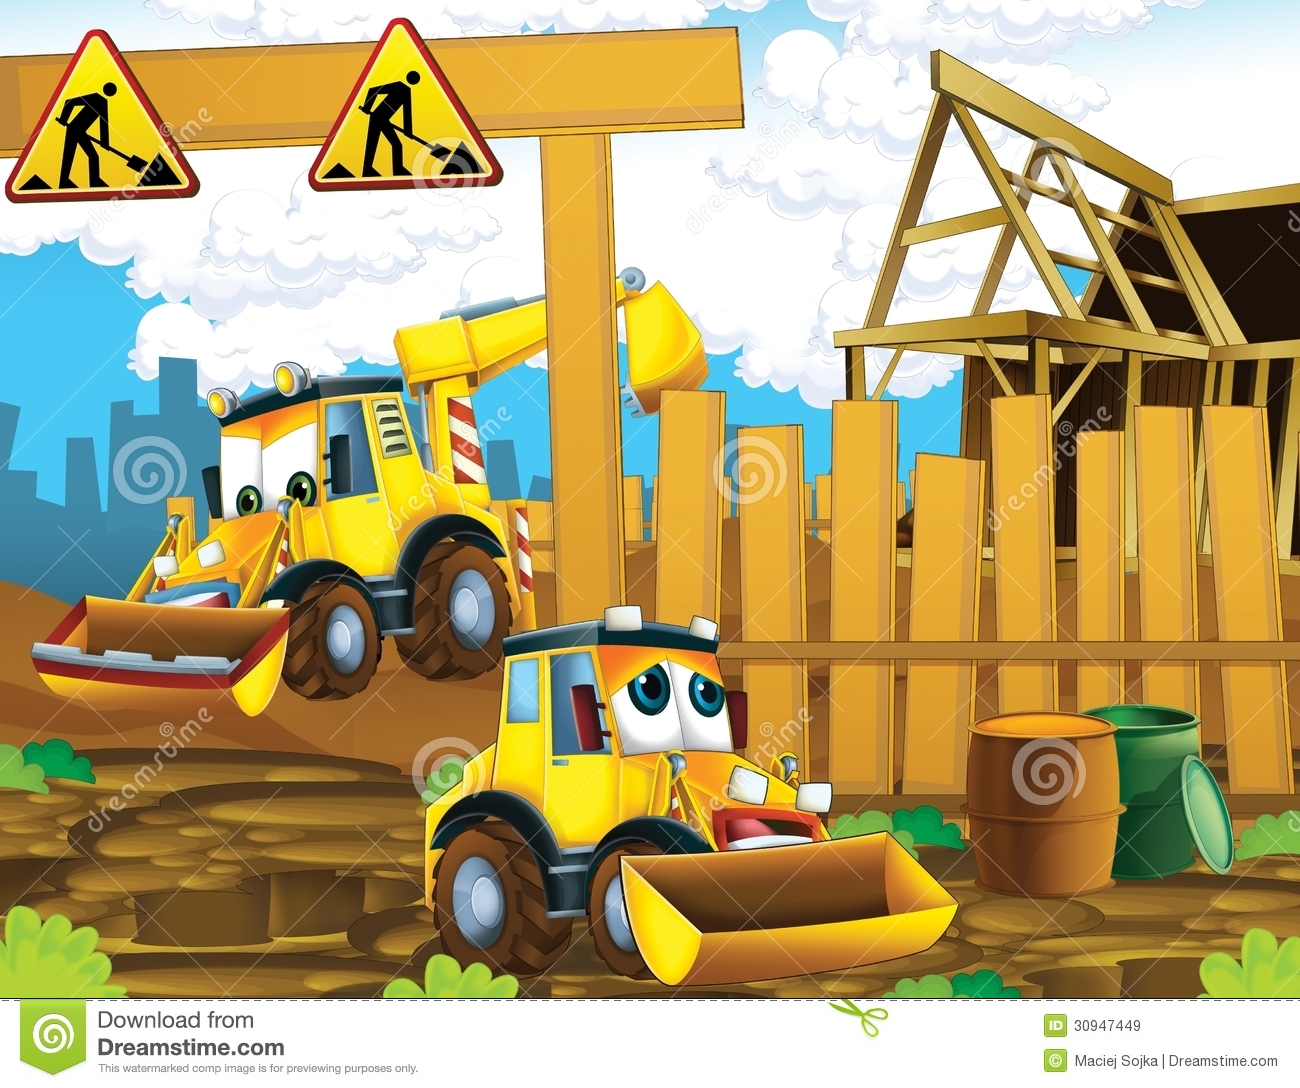 The Cartoon Digger   Illustration For The Children Royalty Free Stock